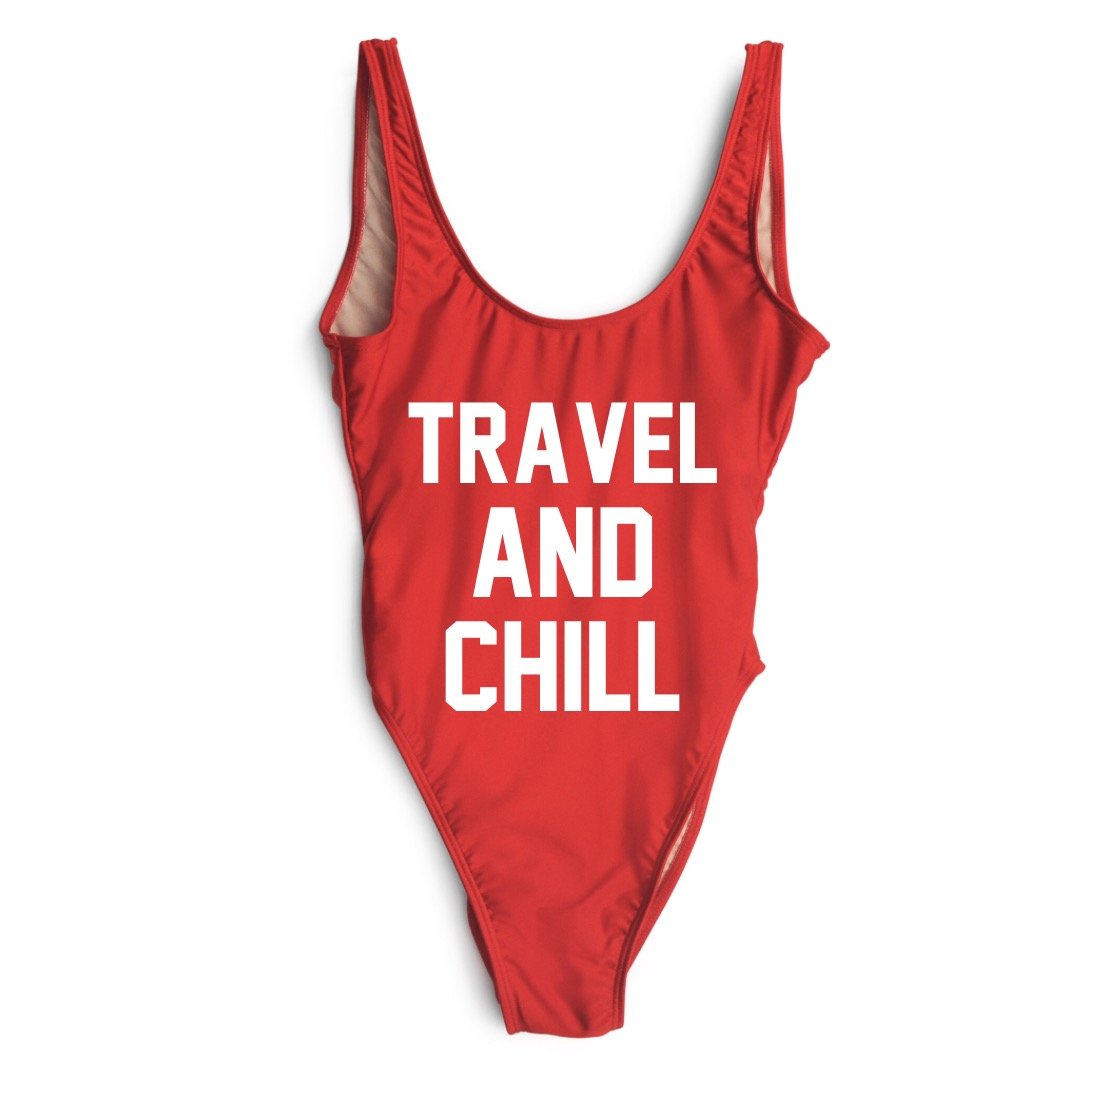 TRAVEL AND CHILL SWIMSUIT (up to 3x)